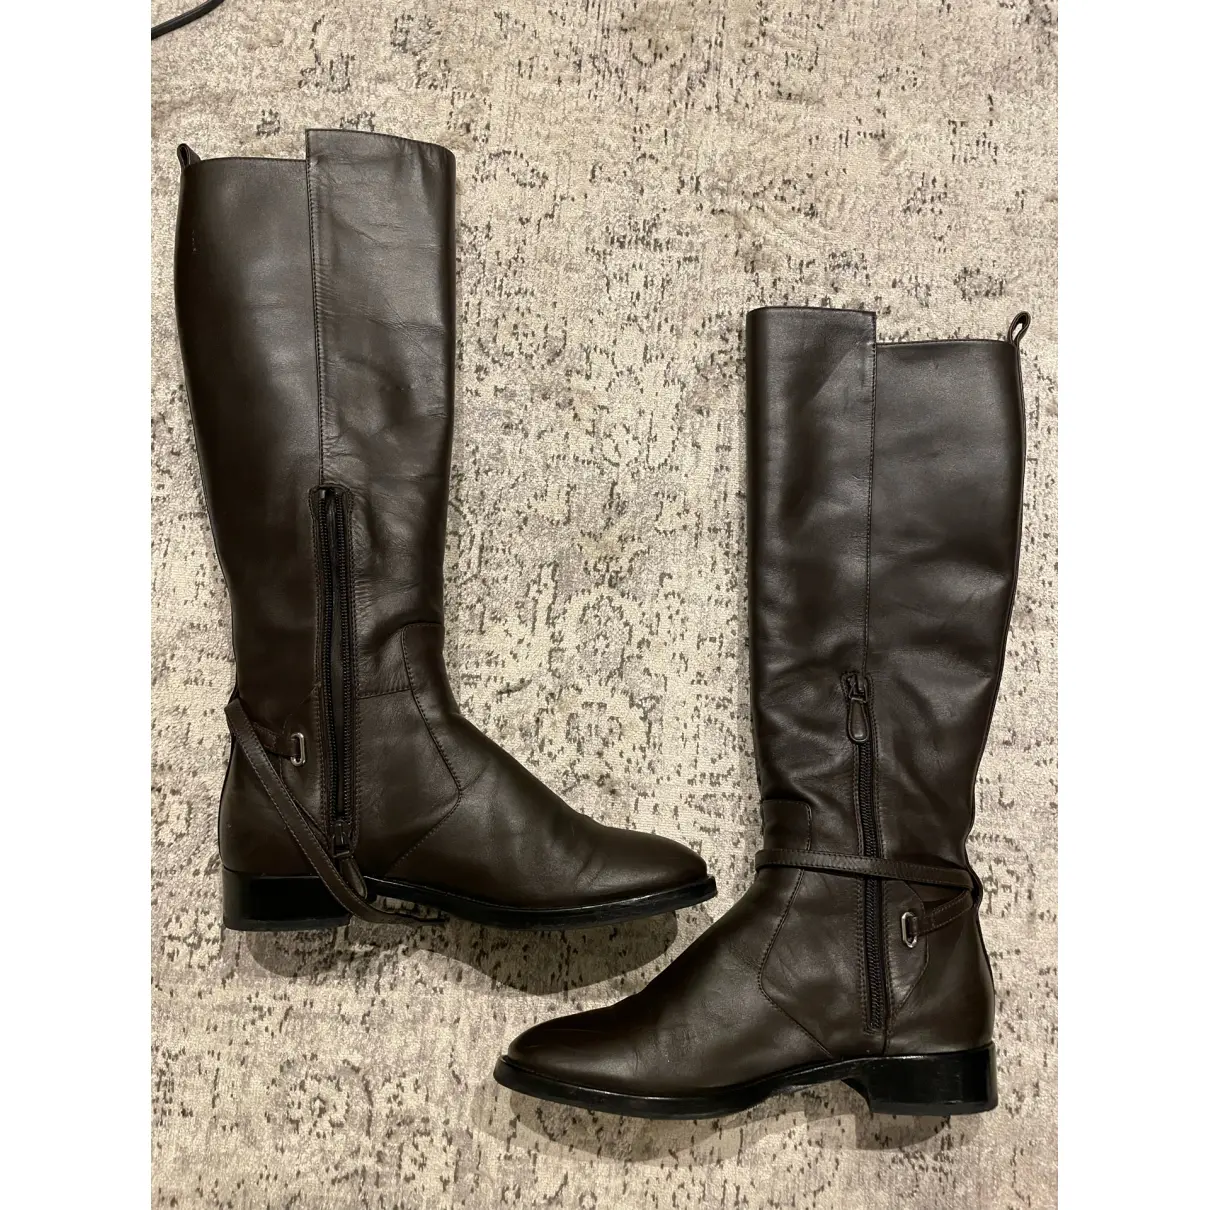 Buy Balenciaga Leather riding boots online